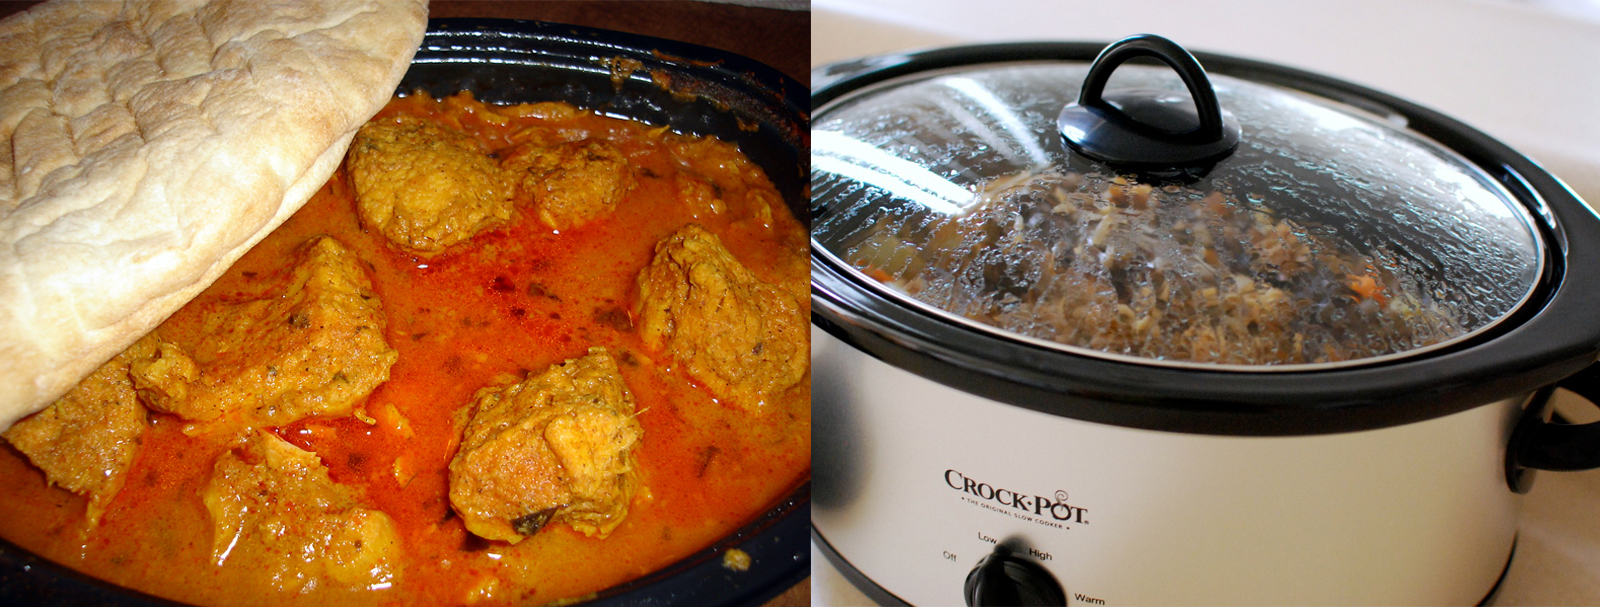 Slow cooked curry